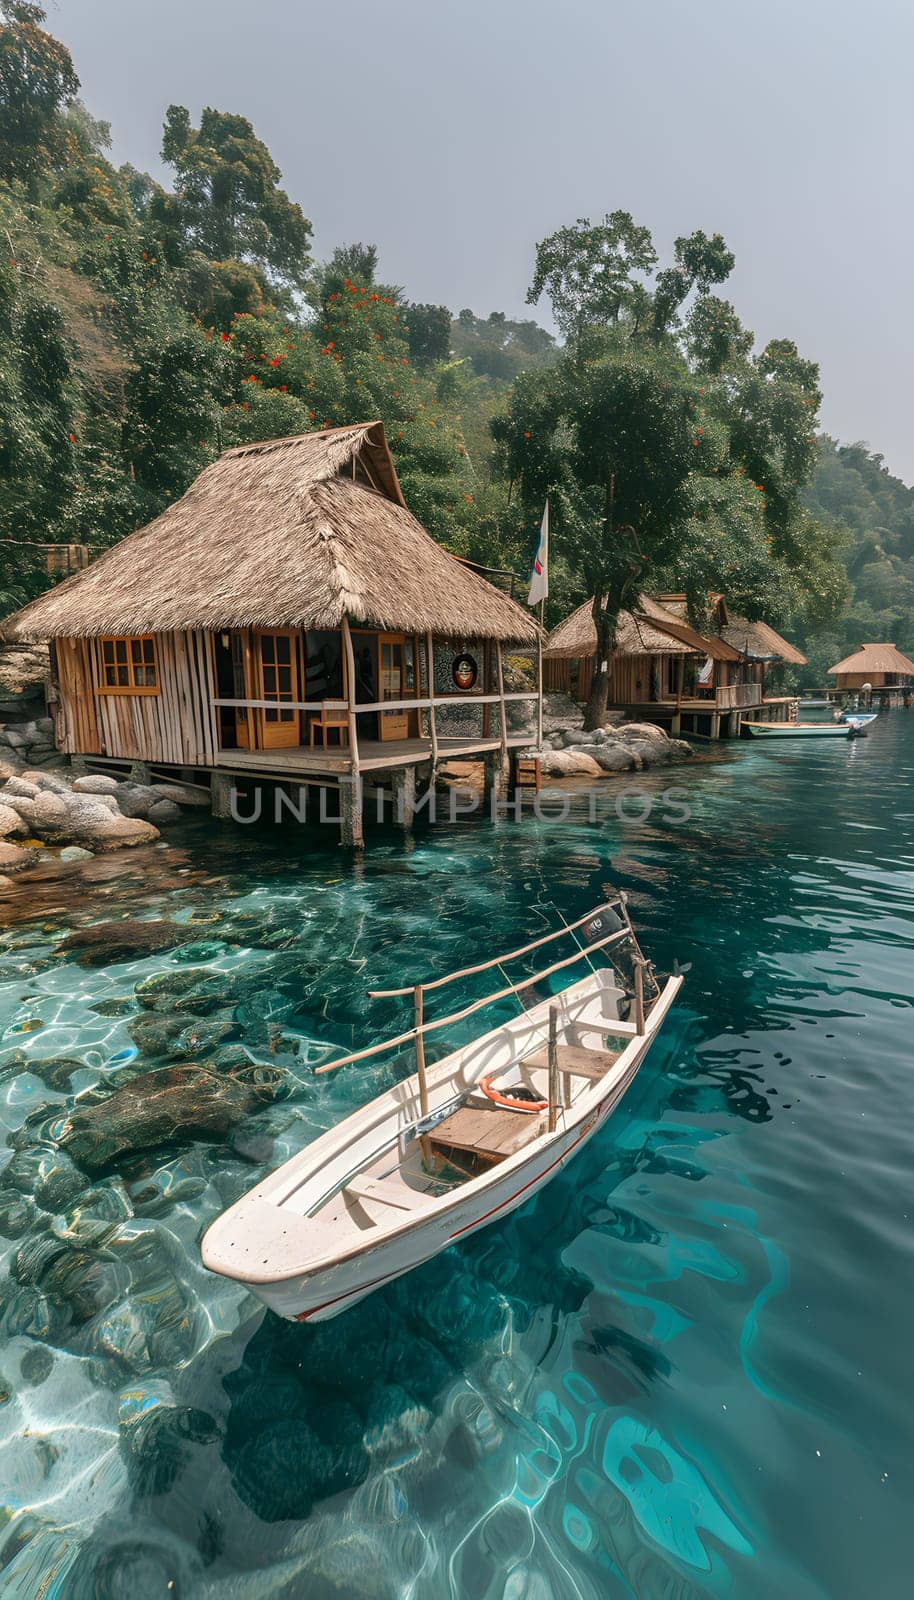 A boat peacefully floats on the tranquil waters of the lake next to a rustic hut, surrounded by lush greenery and under a clear blue sky